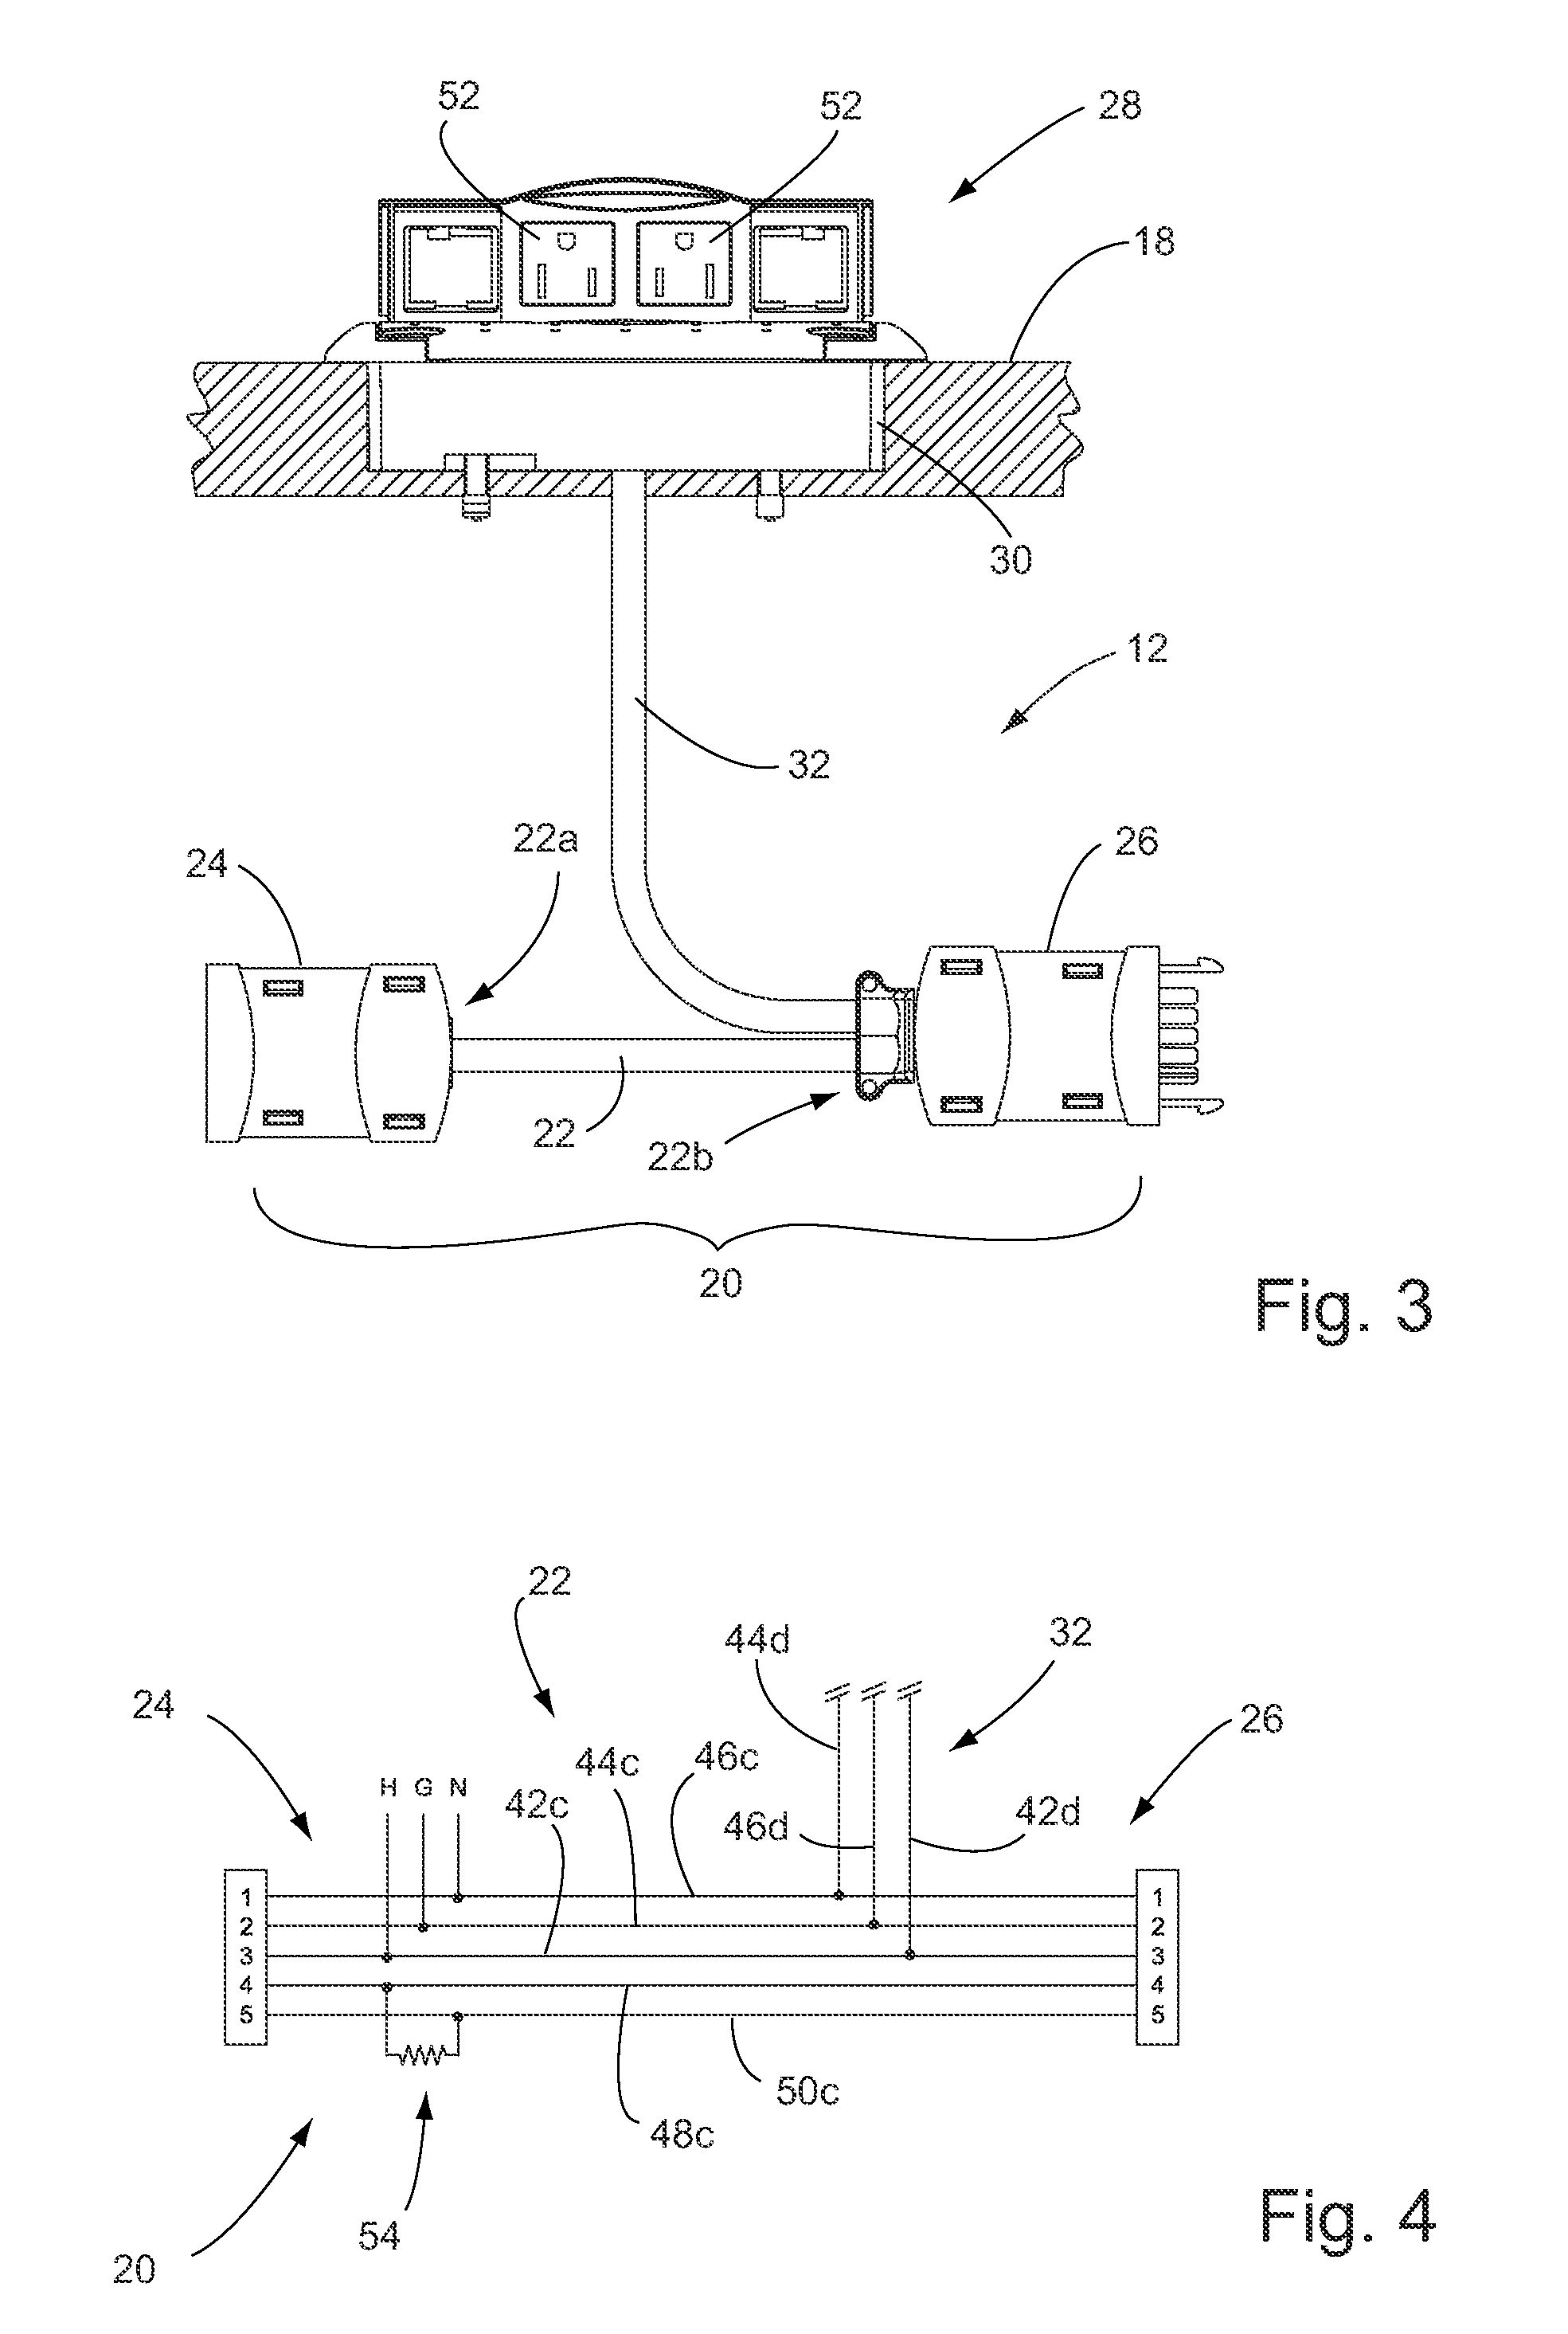 Electrical system with circuit limiter